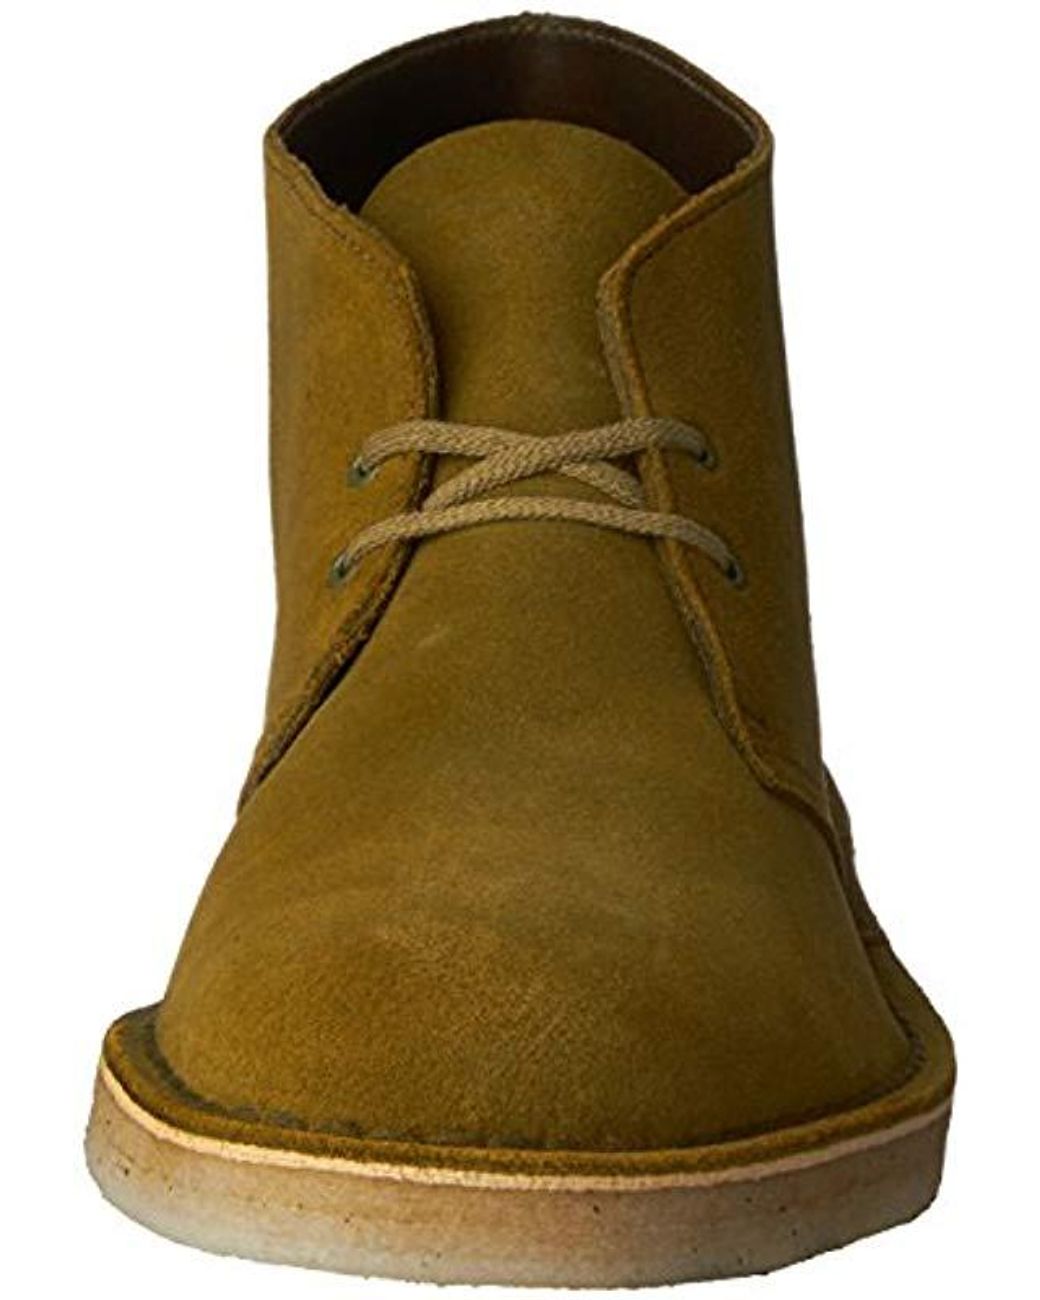 for Men Clarks Suede Desert Coal in Green Camo Mens Shoes Boots Chukka boots and desert boots Green 